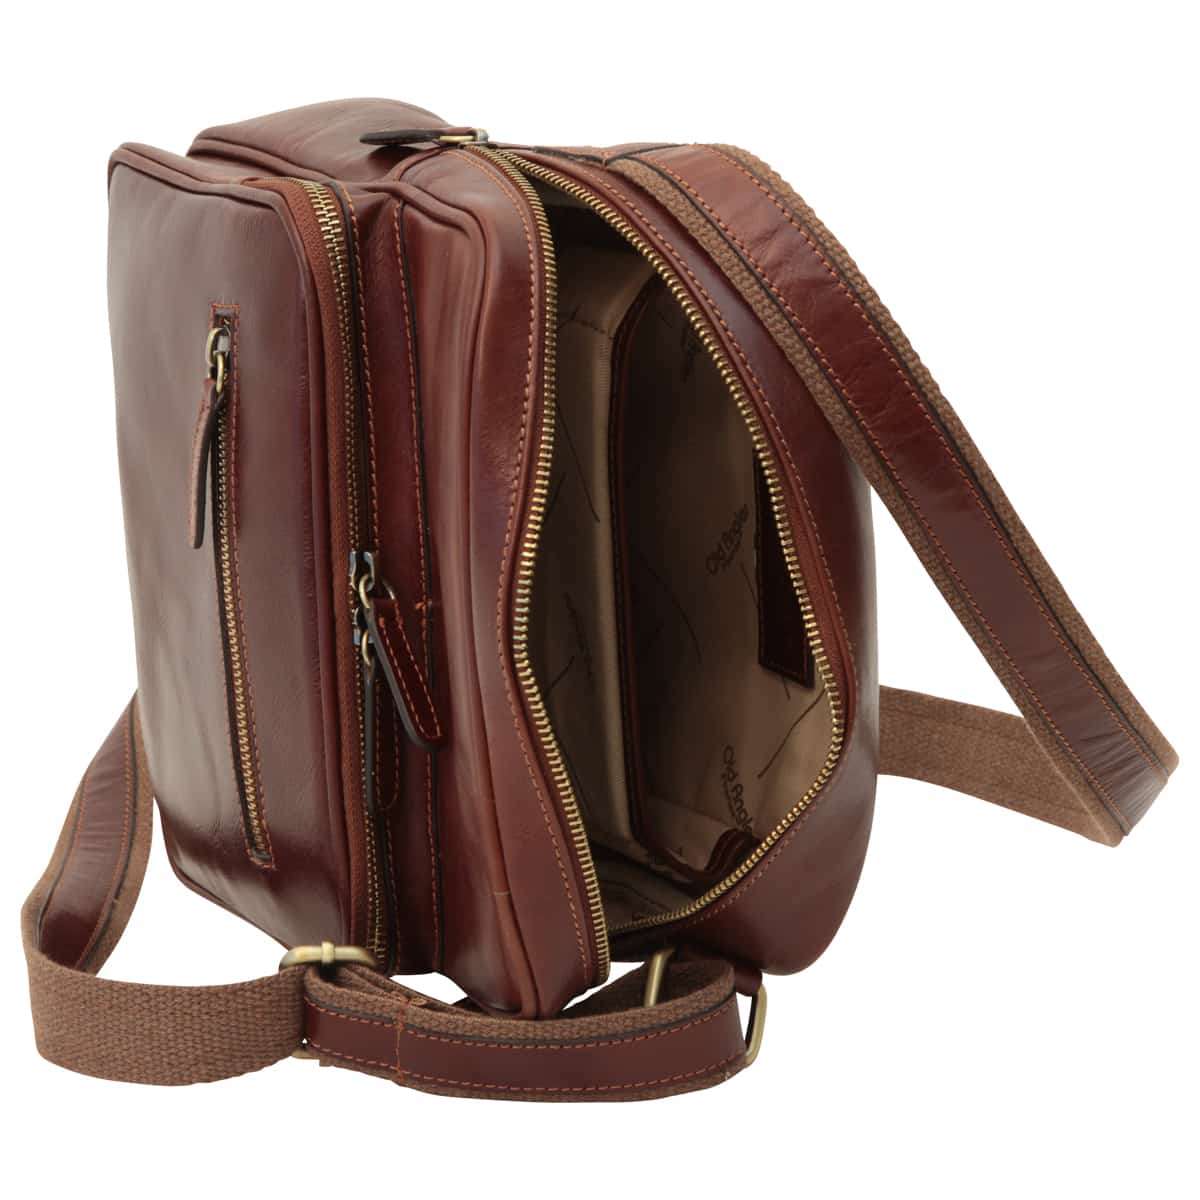 Small leather bag with zip closures - Brown | 409389MA UK | Old Angler Firenze